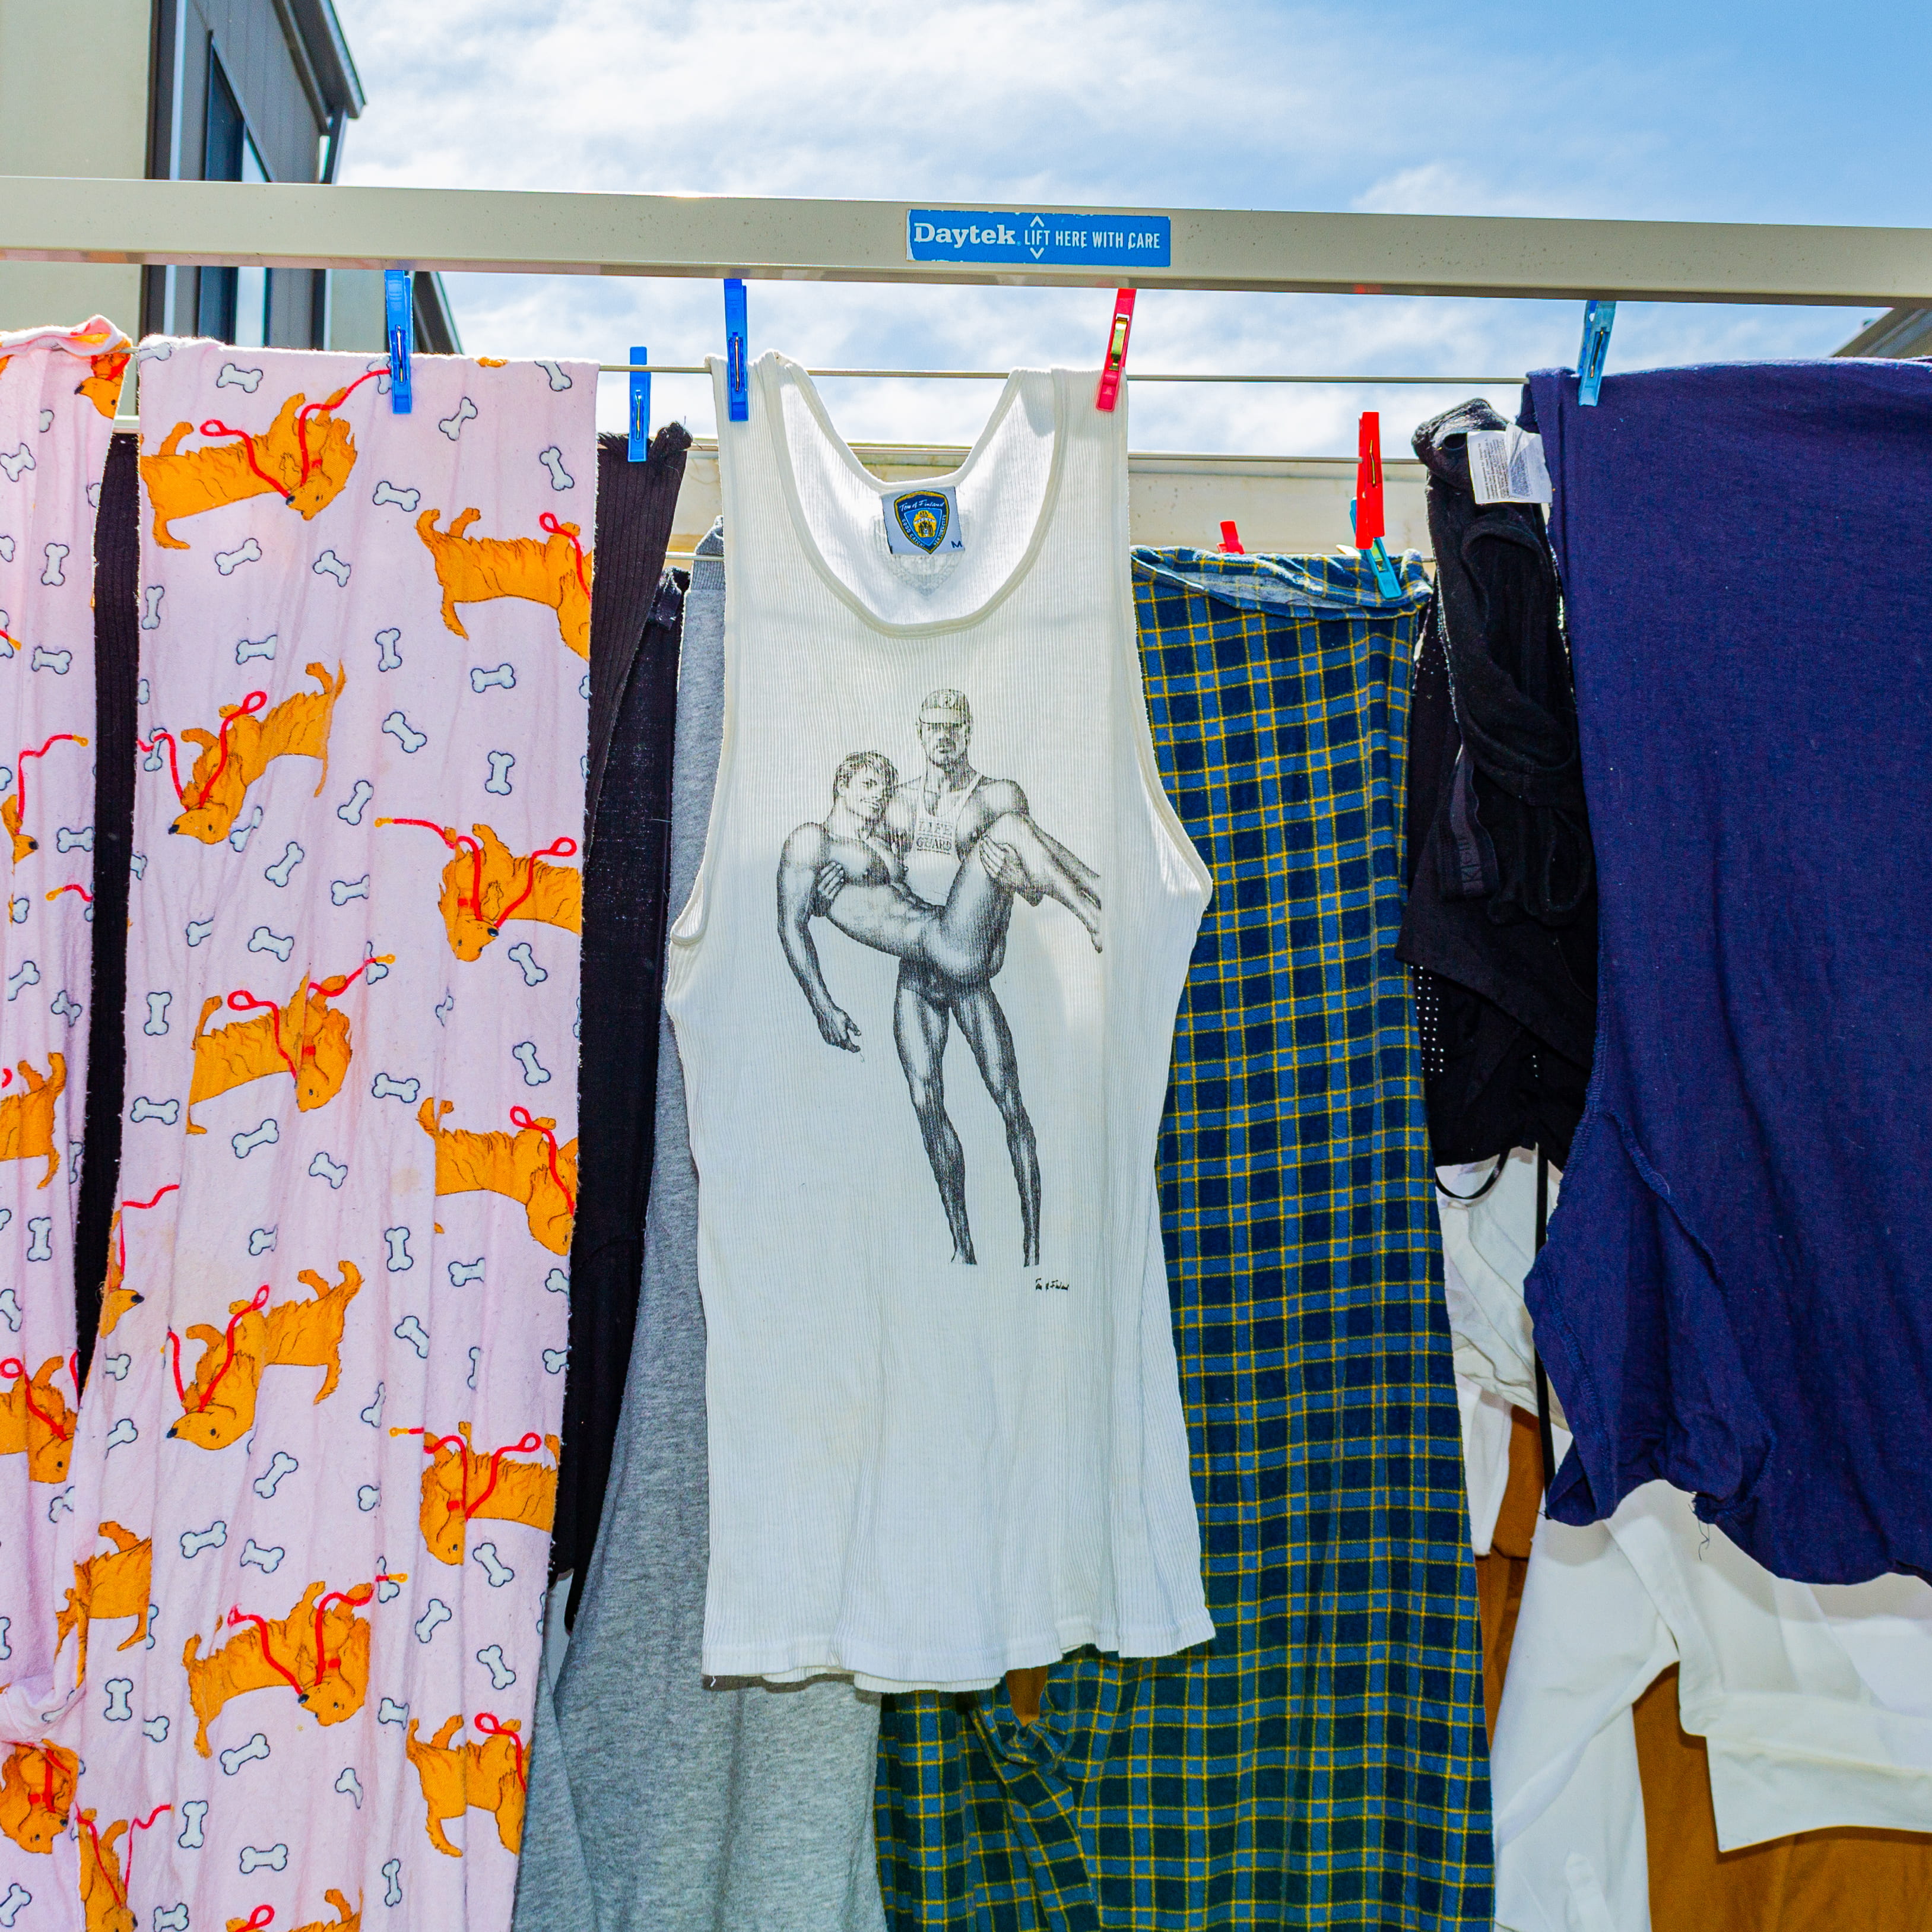 Photograph of a washing line with various clothes featuring a Tom of Finland design tank top